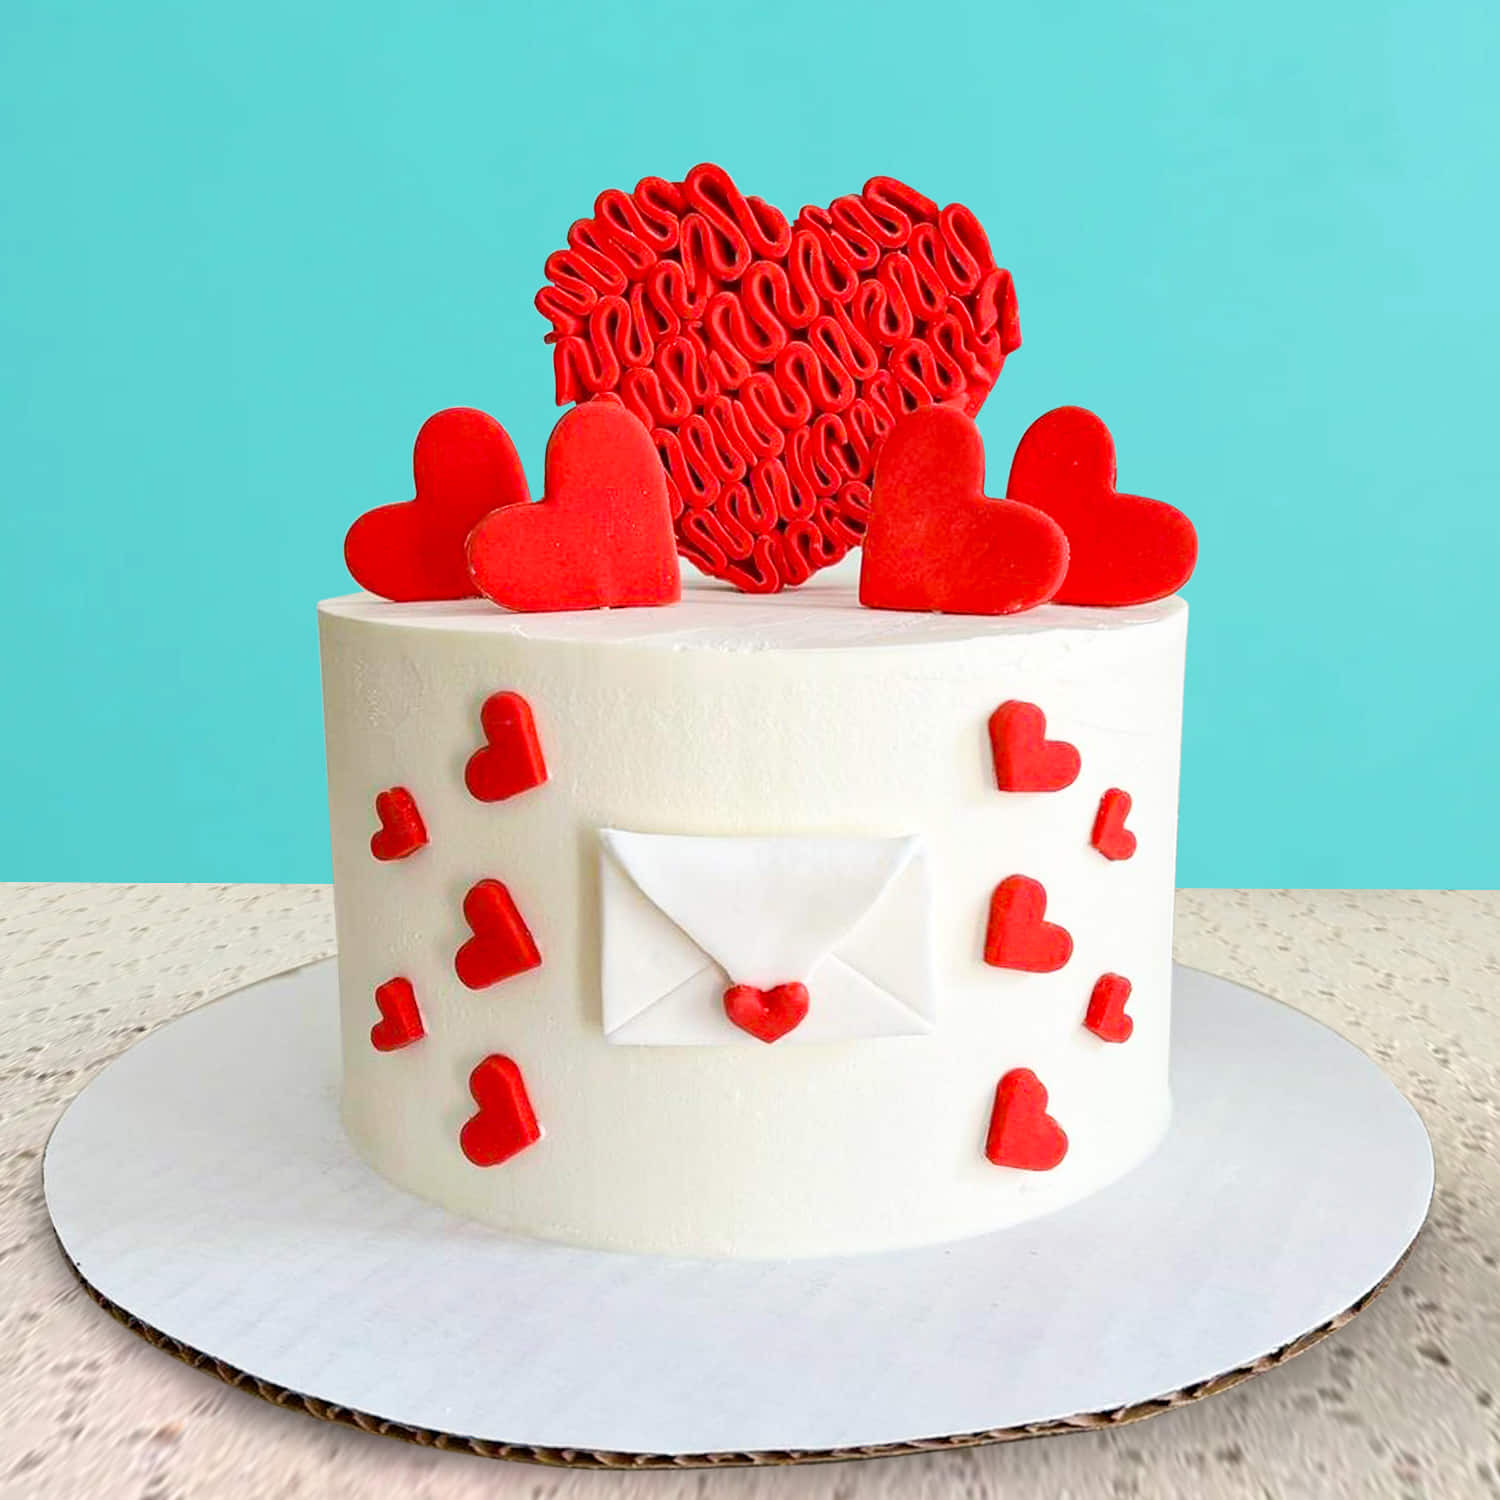 Special Red Velvet Cake - Happy Birthday With Love Cake Transparent PNG -  600x600 - Free Download on NicePNG